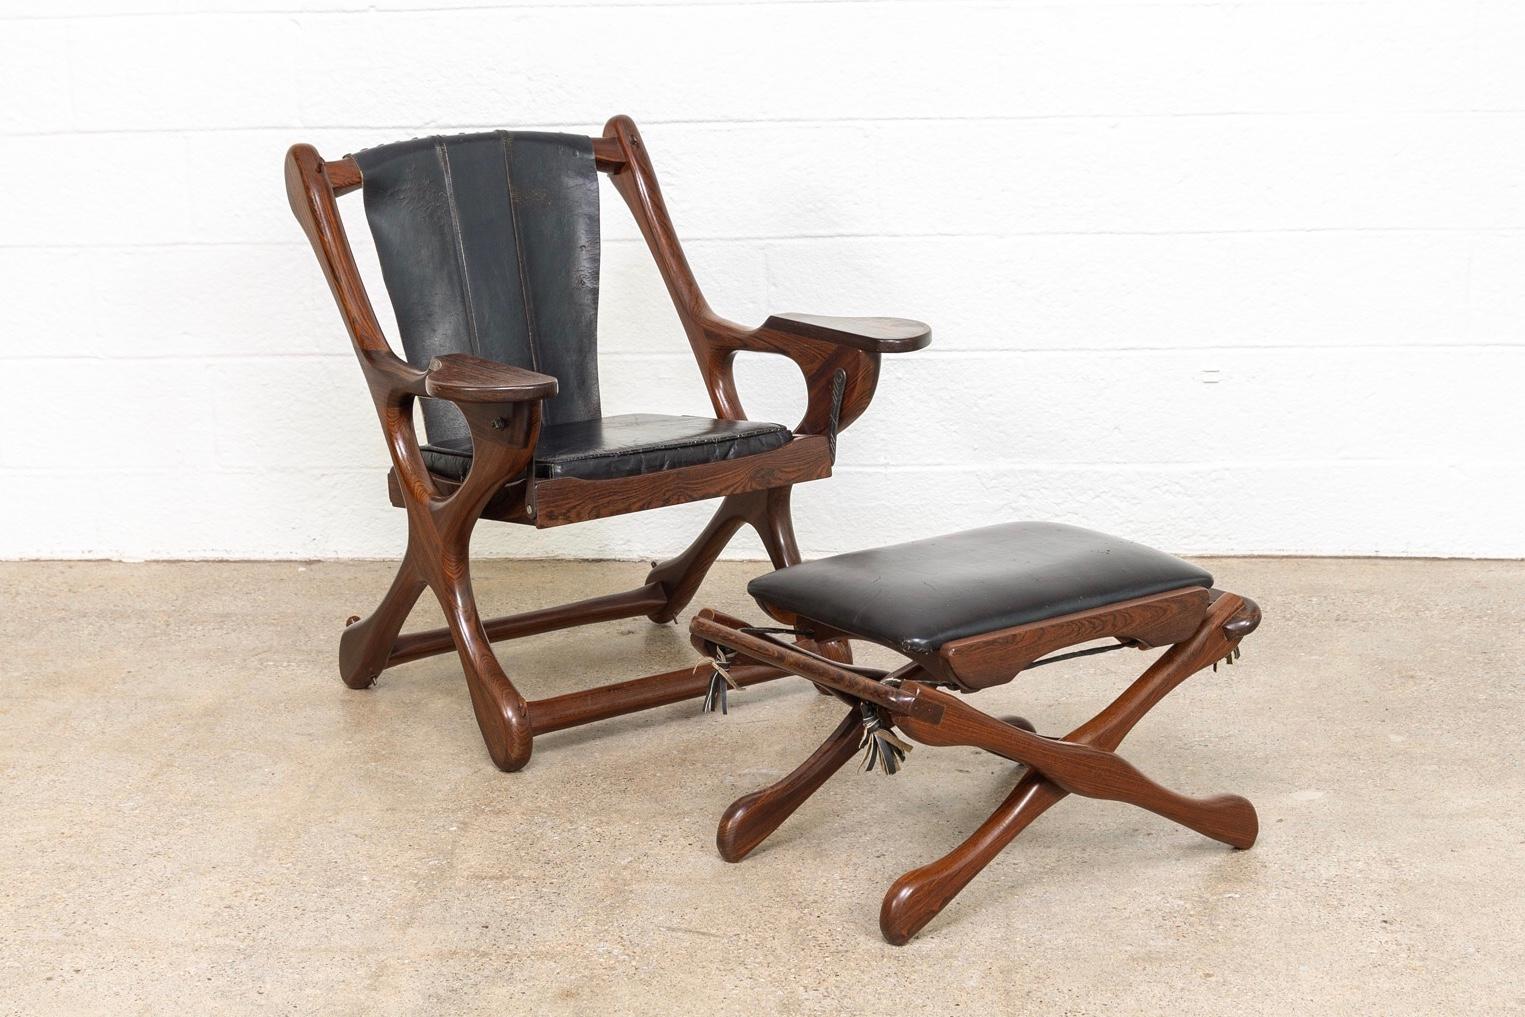 This vintage Mid-Century Modern armchair was designed in the 1950s by Don Shoemaker and produced by Señal, S.A., Mexico circa 1960. A leading midcentury Mexican modernist, Shoemaker’s pieces feature biomorphic shapes and exotic woods designed with